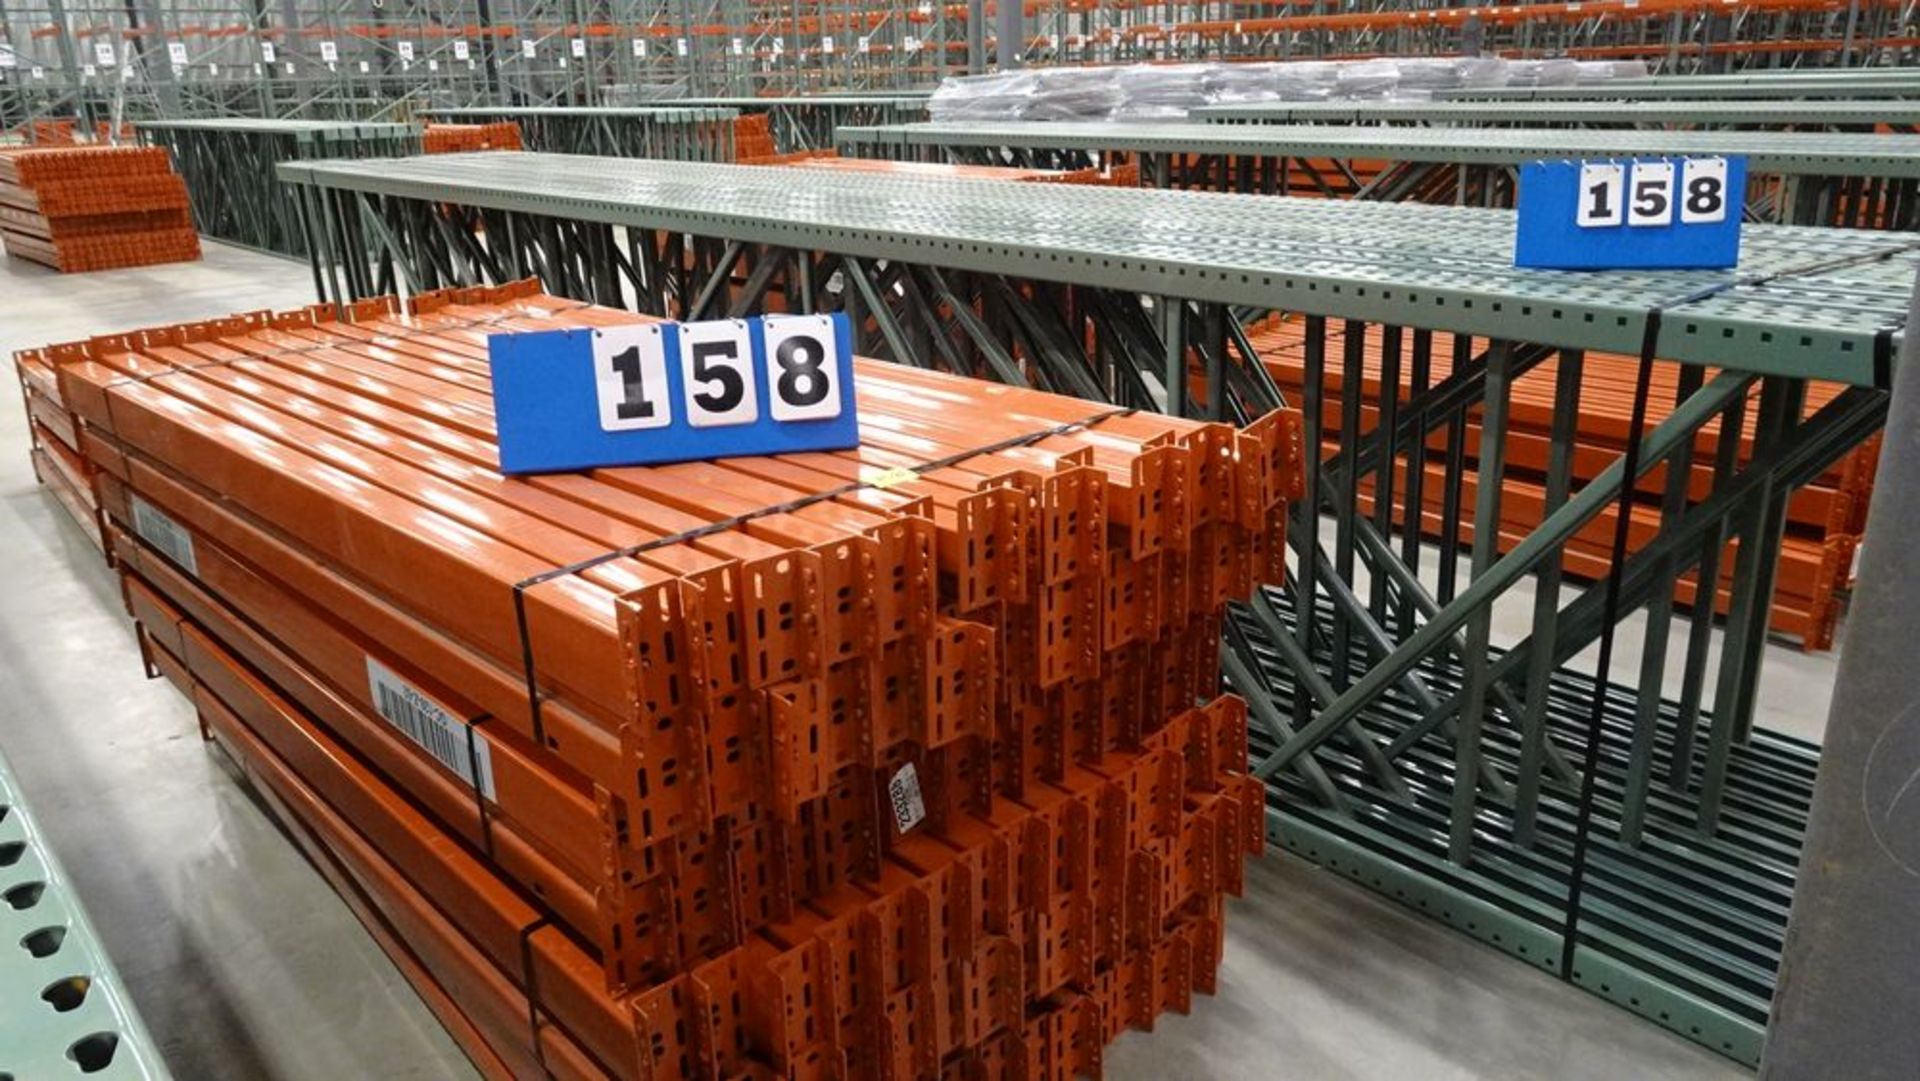 SECTIONS OF RIDG-U-RACK INTERLAKE INDUSTRIAL PALLET RACKING CONSISTING OF: (15) 48"D X 24'H